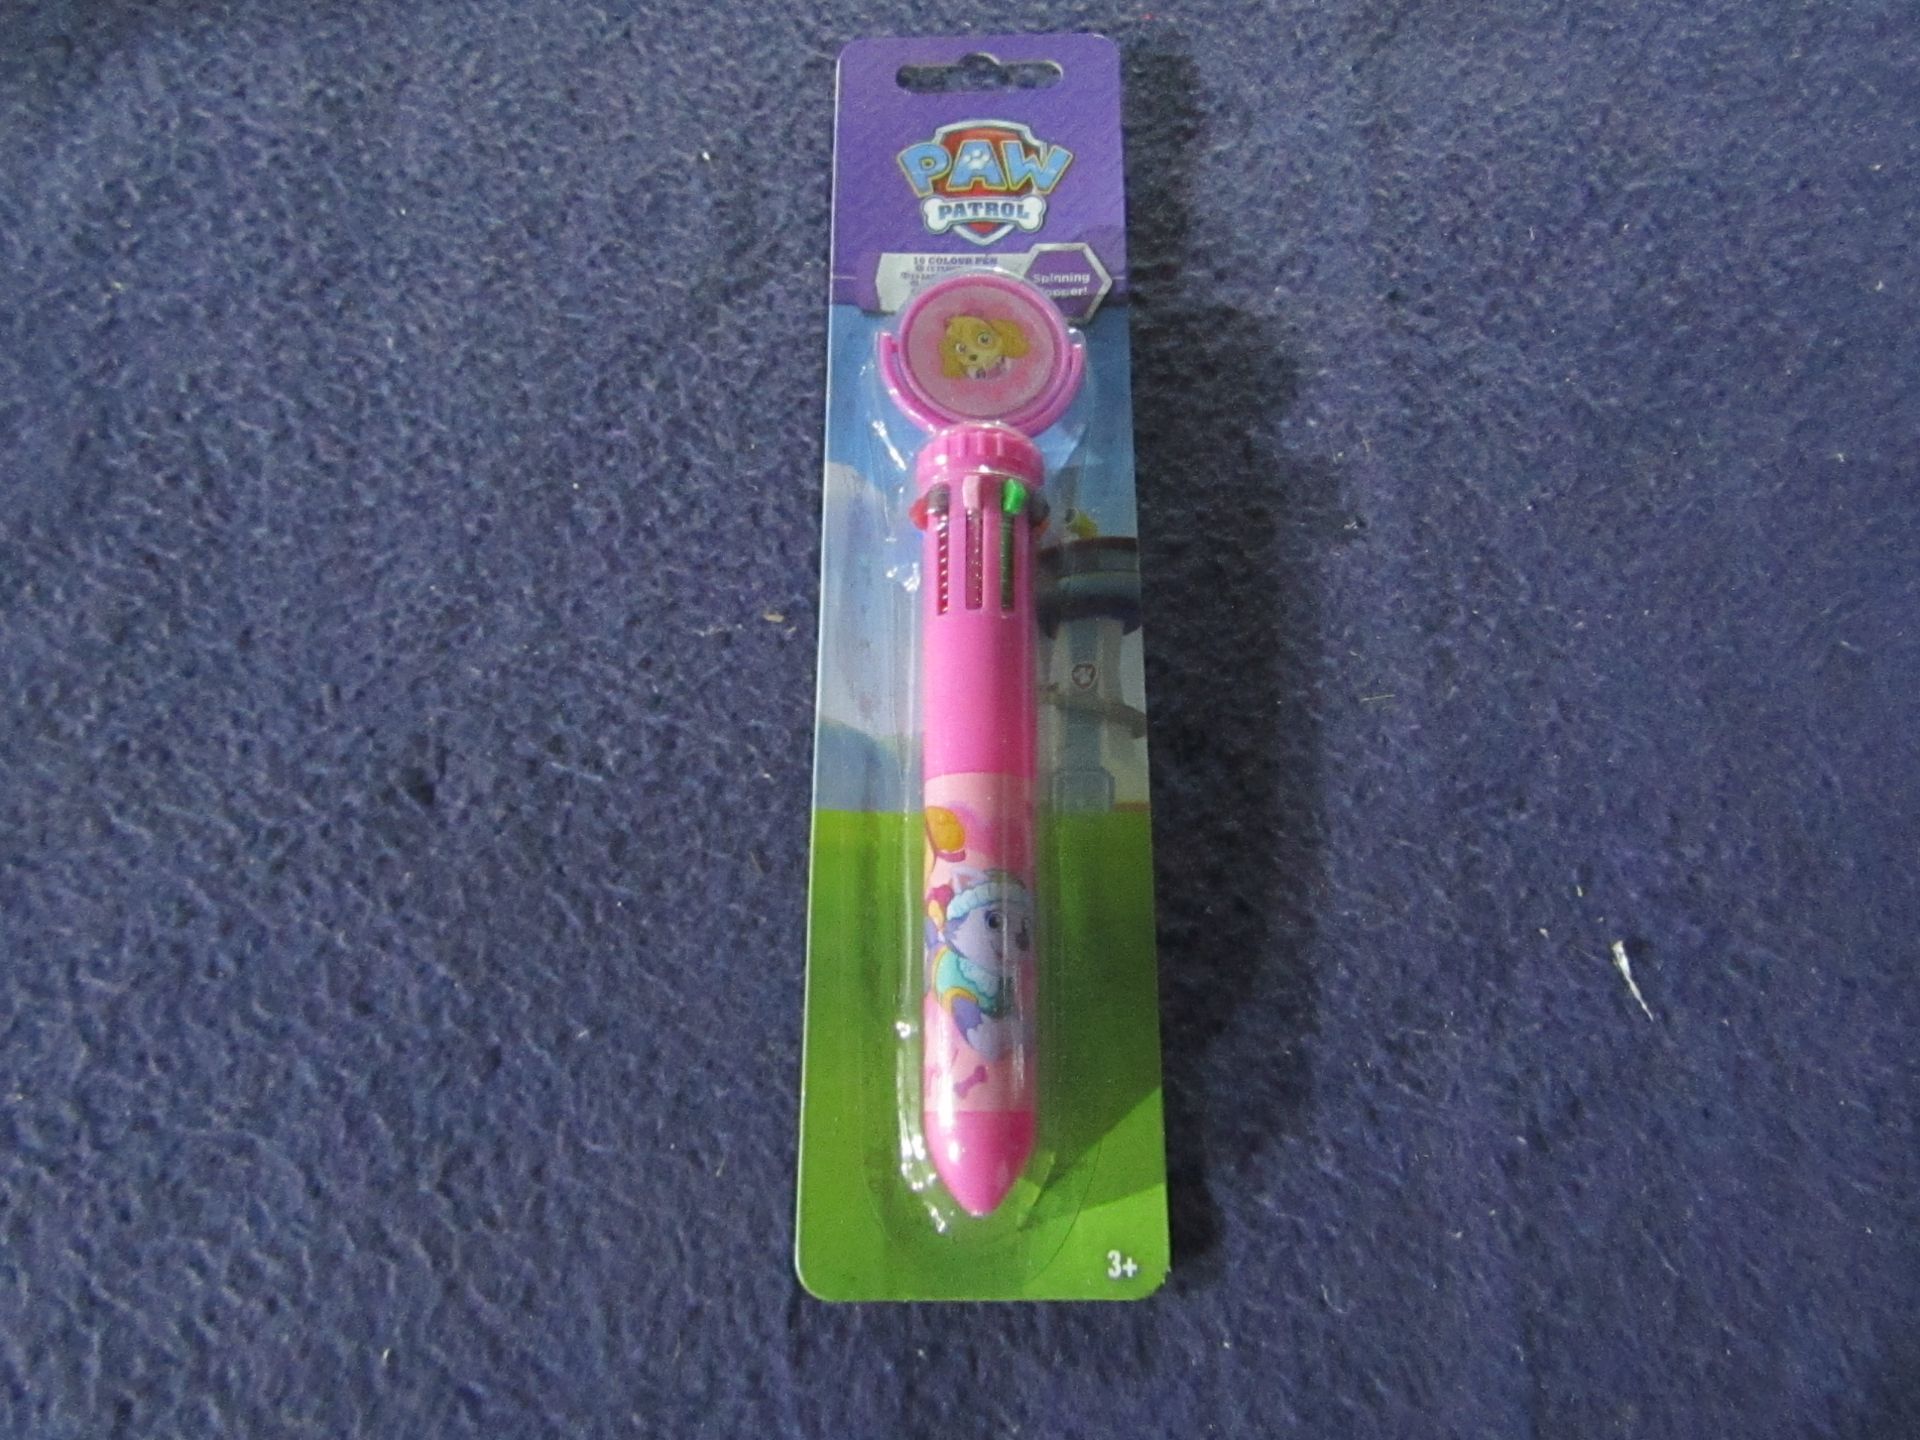 6x Paw Patrol - Skye Pink 10-Colour Spinning Top Pens - All New & Packaged.